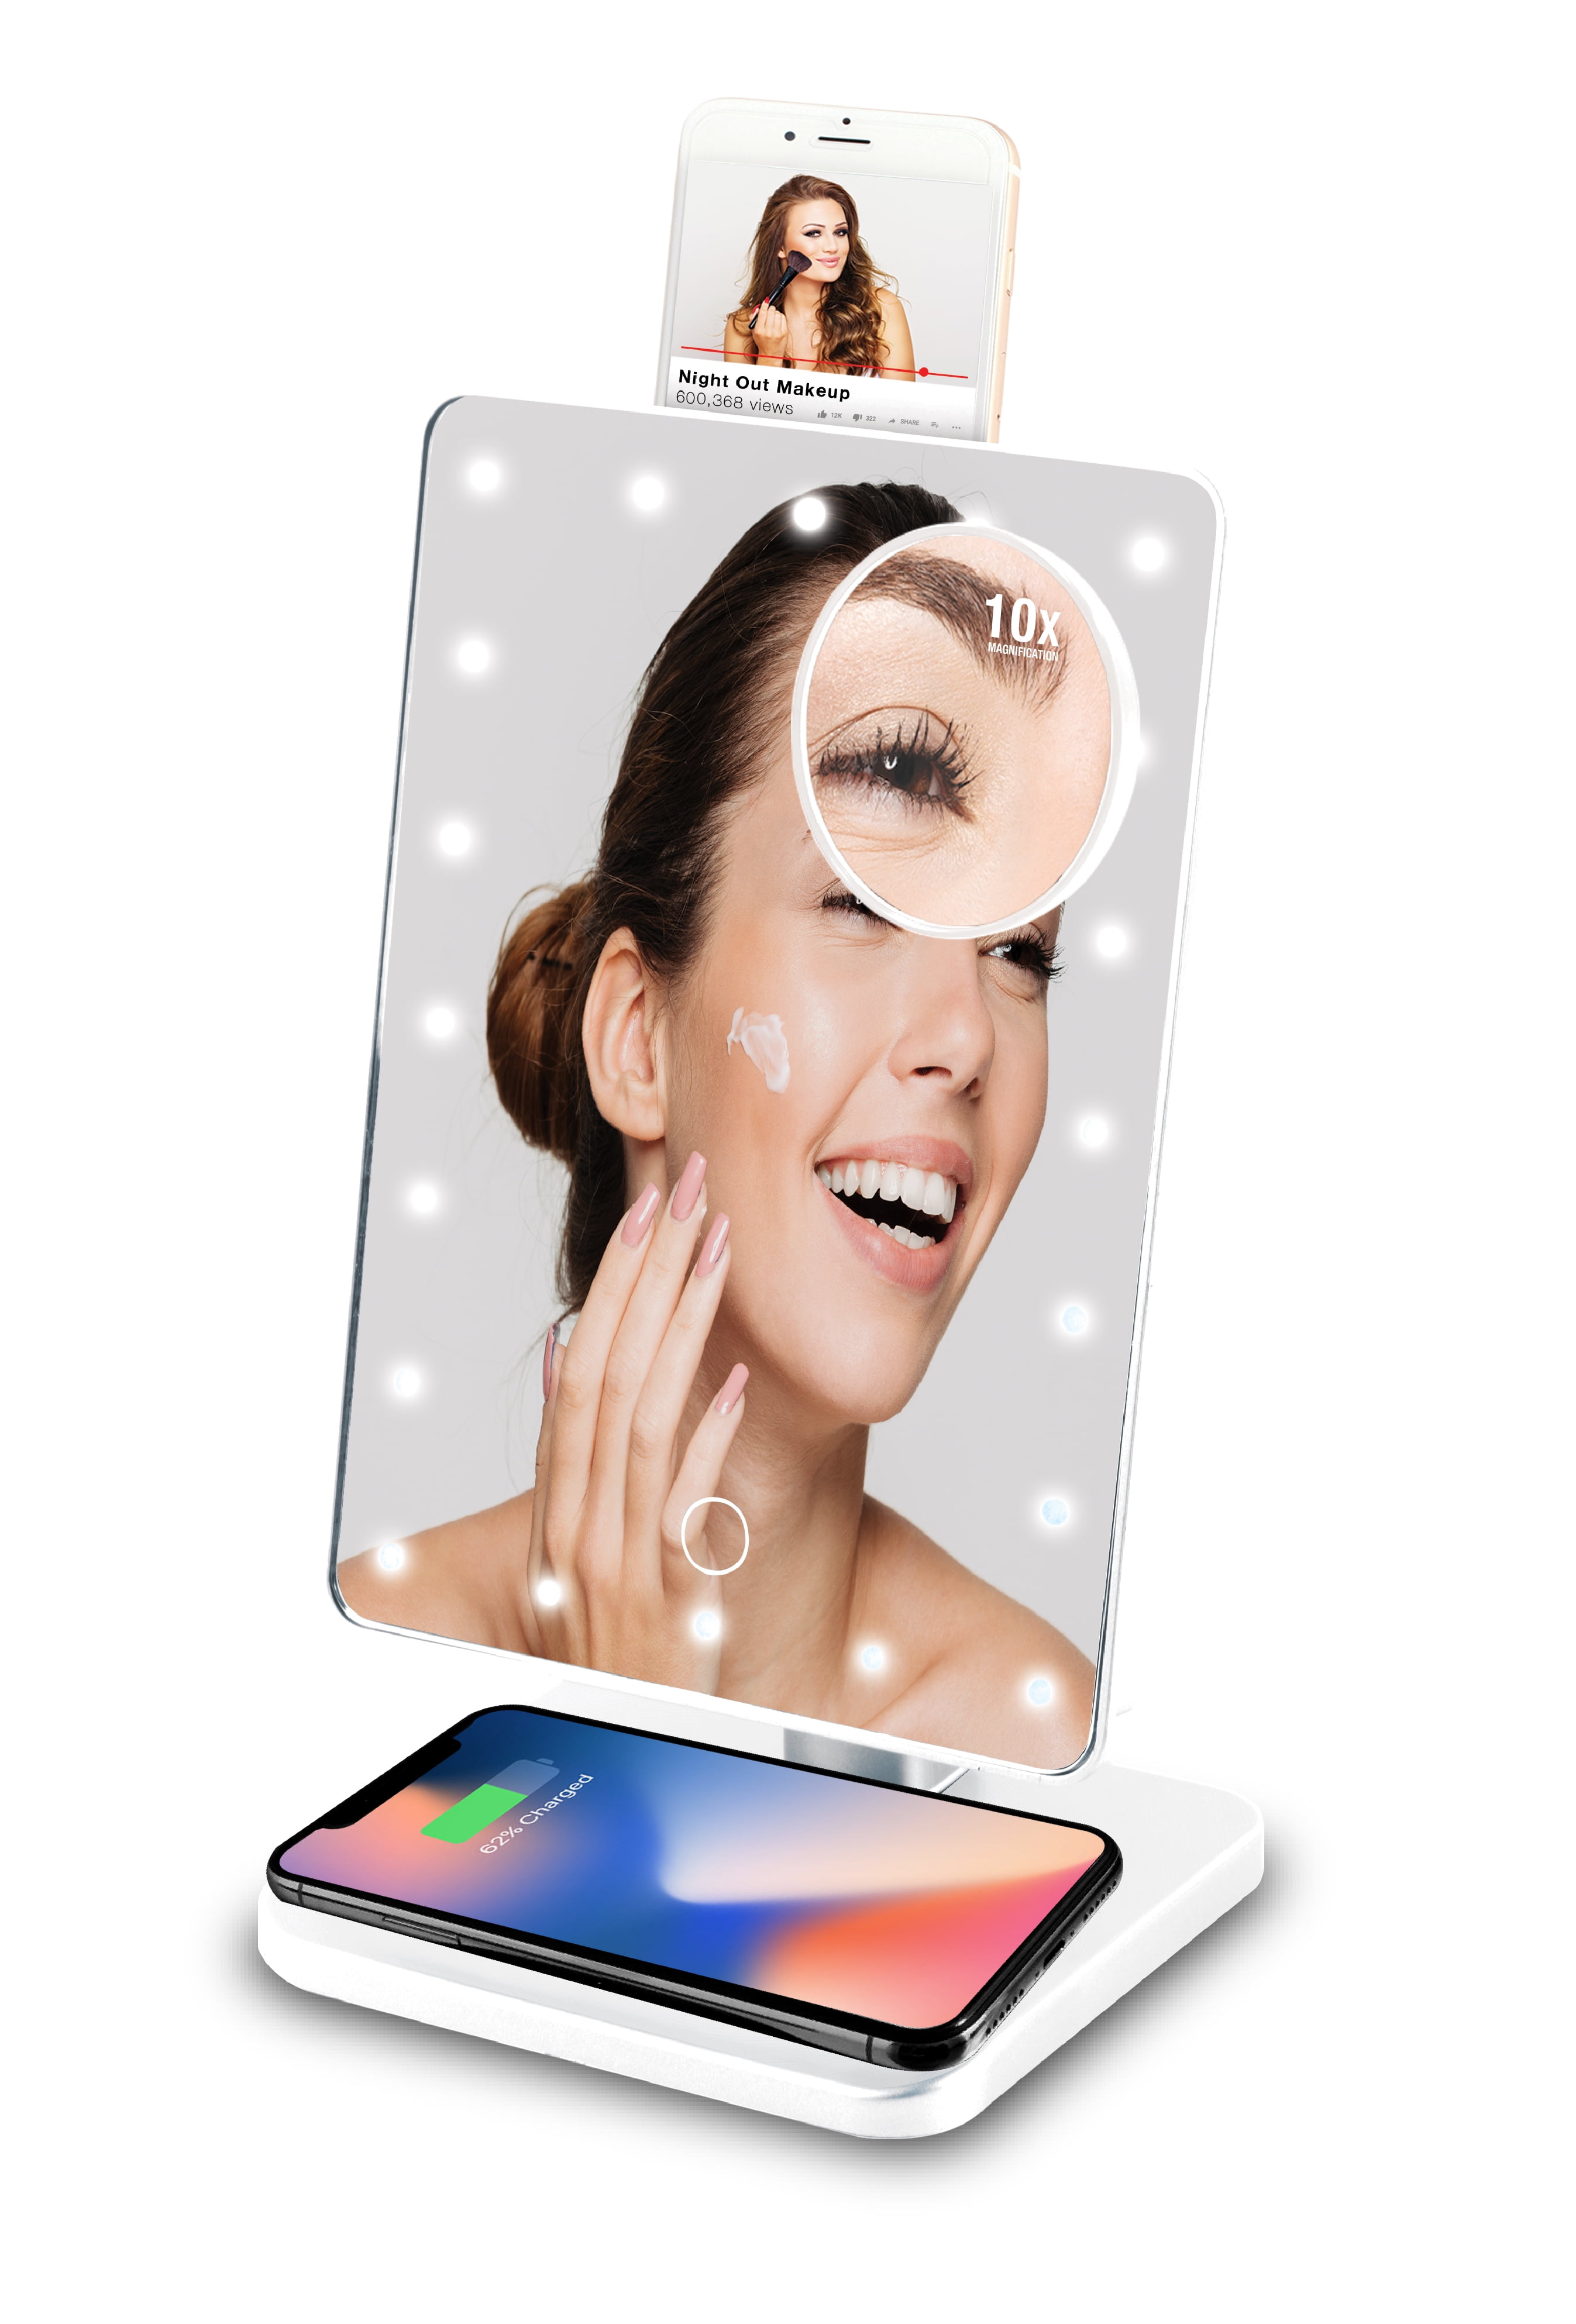 Vivitar Makeup Mirror 10x Magnification, Small Cream Vanity Mirror With Lights And Bluetooth Speaker At Same Time